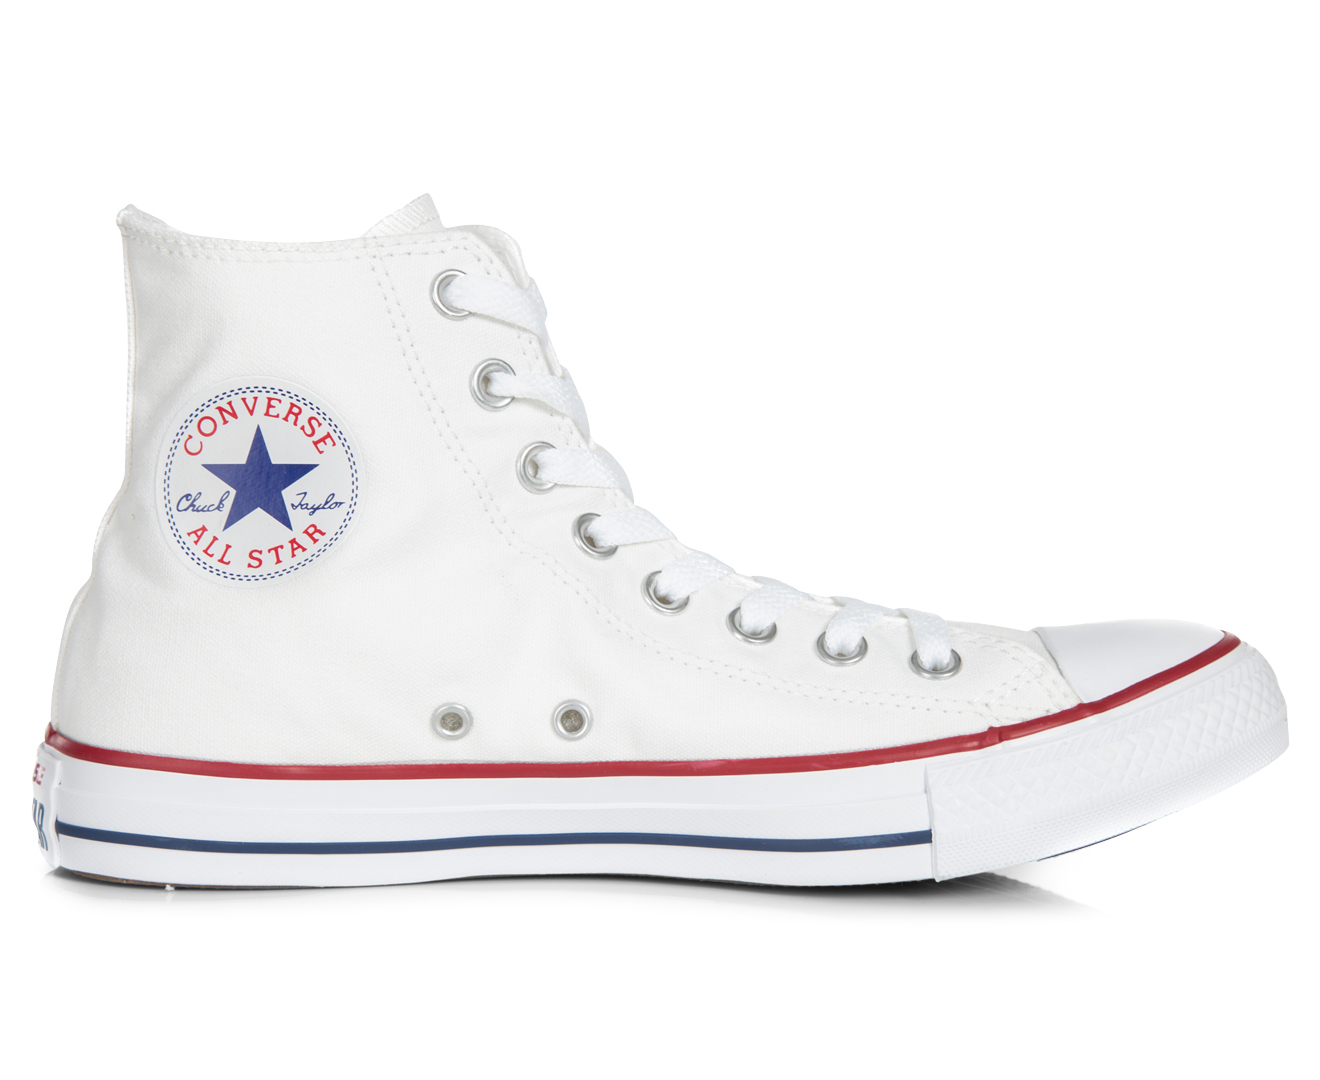 Converse Chuck Taylor Unisex All Star High Top Sneakers - Optic White ...